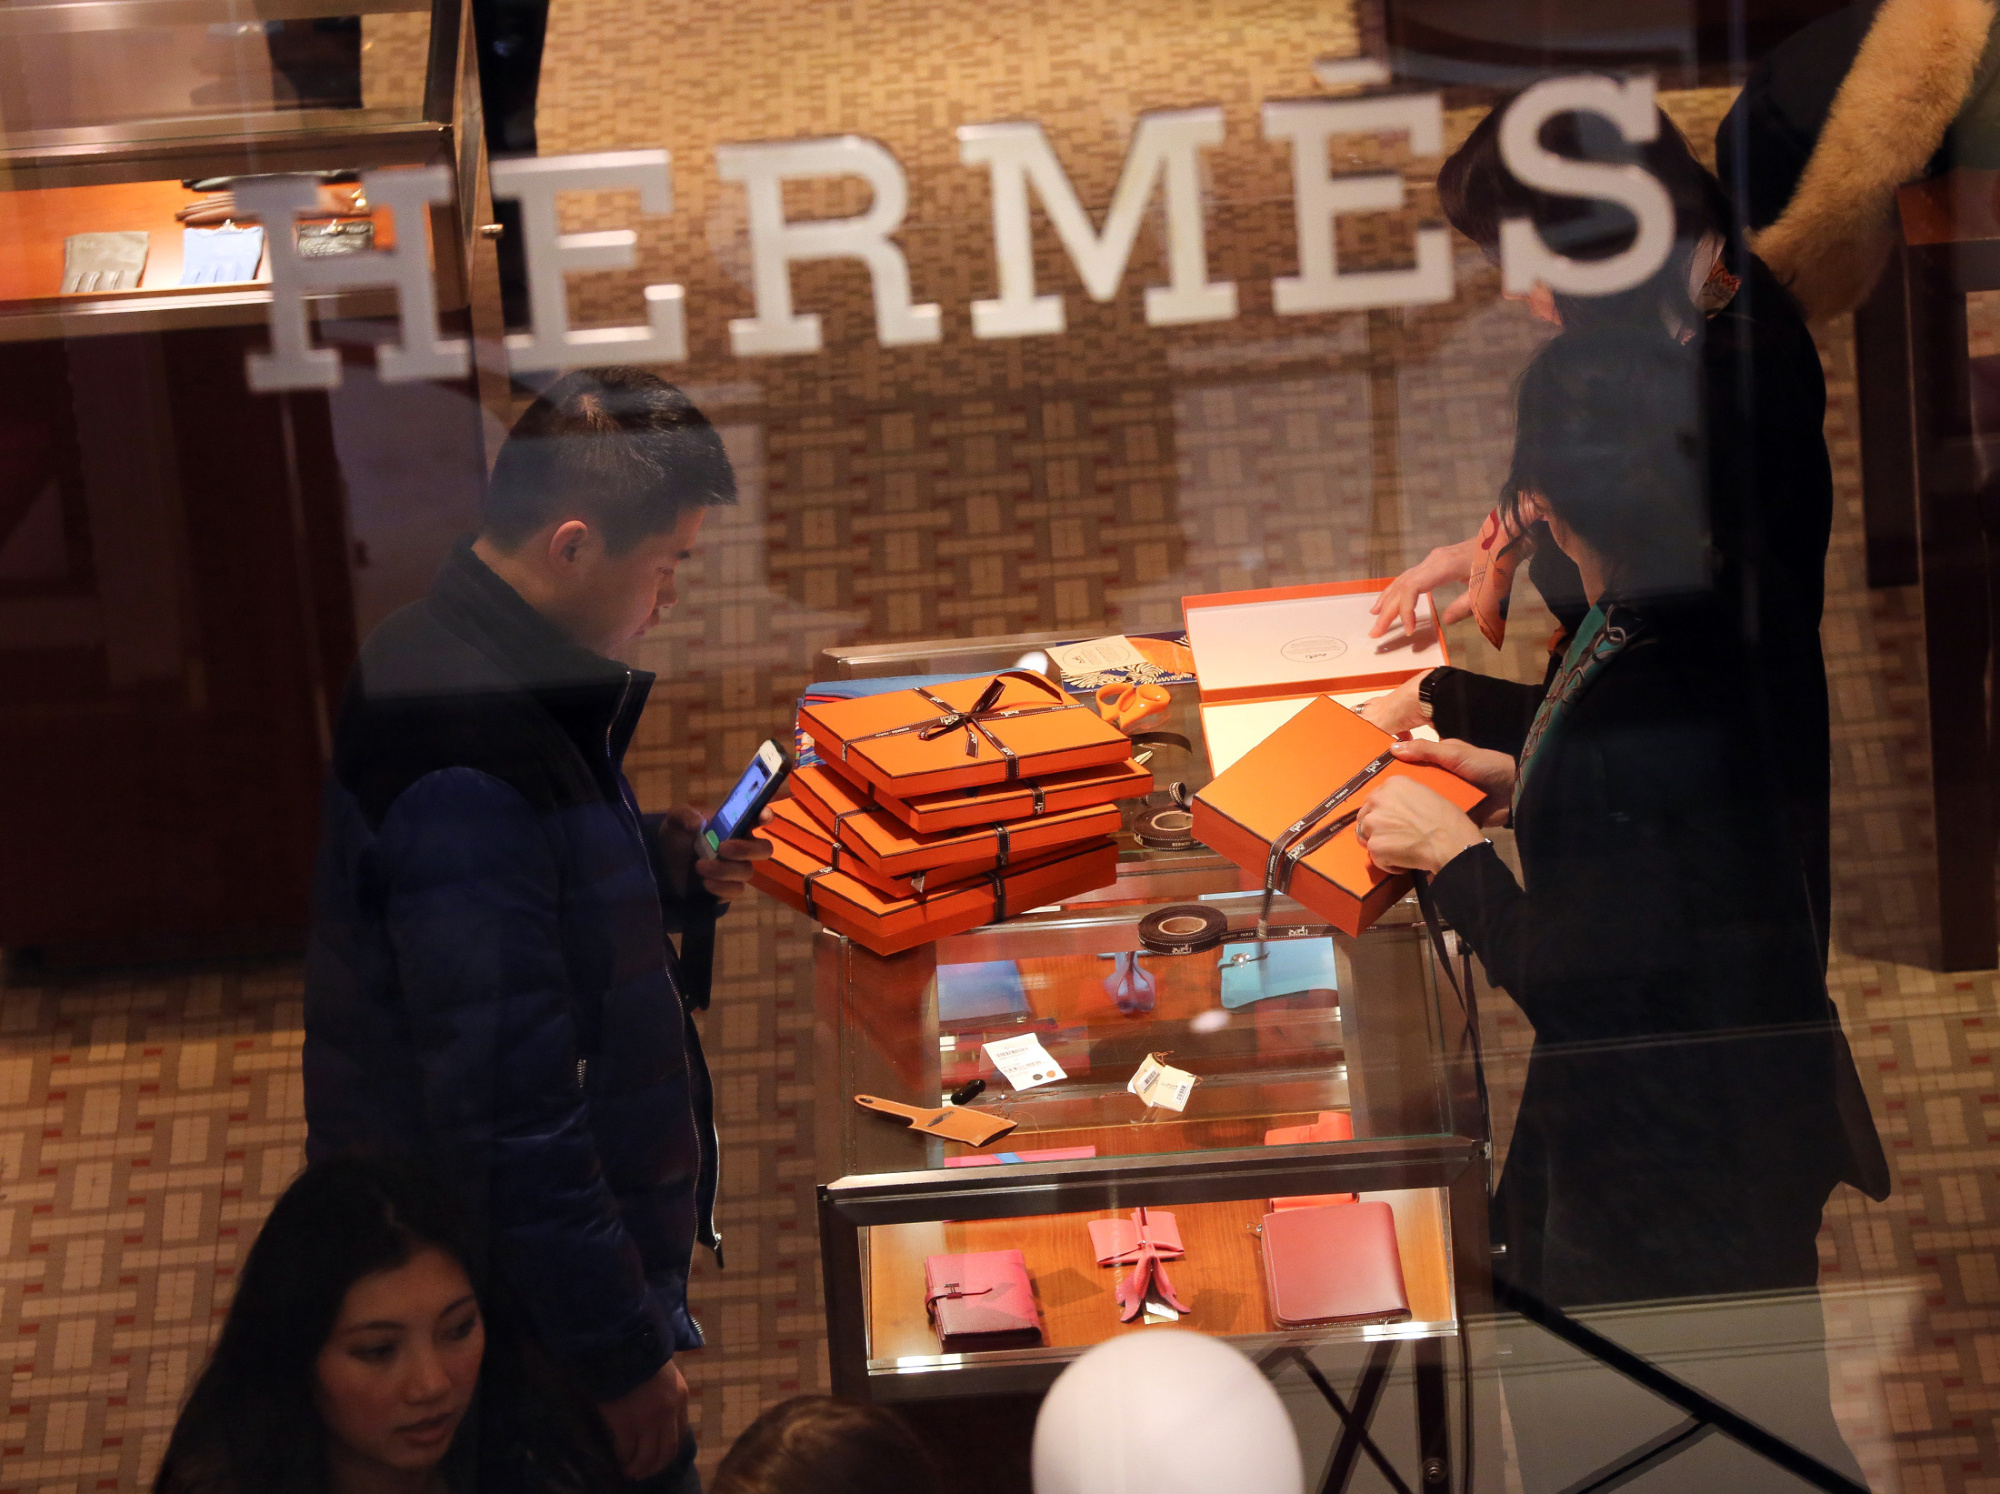 Hermes and Quiet Luxury Are Still Selling, Even as Other Brands Take a Hit  - Bloomberg